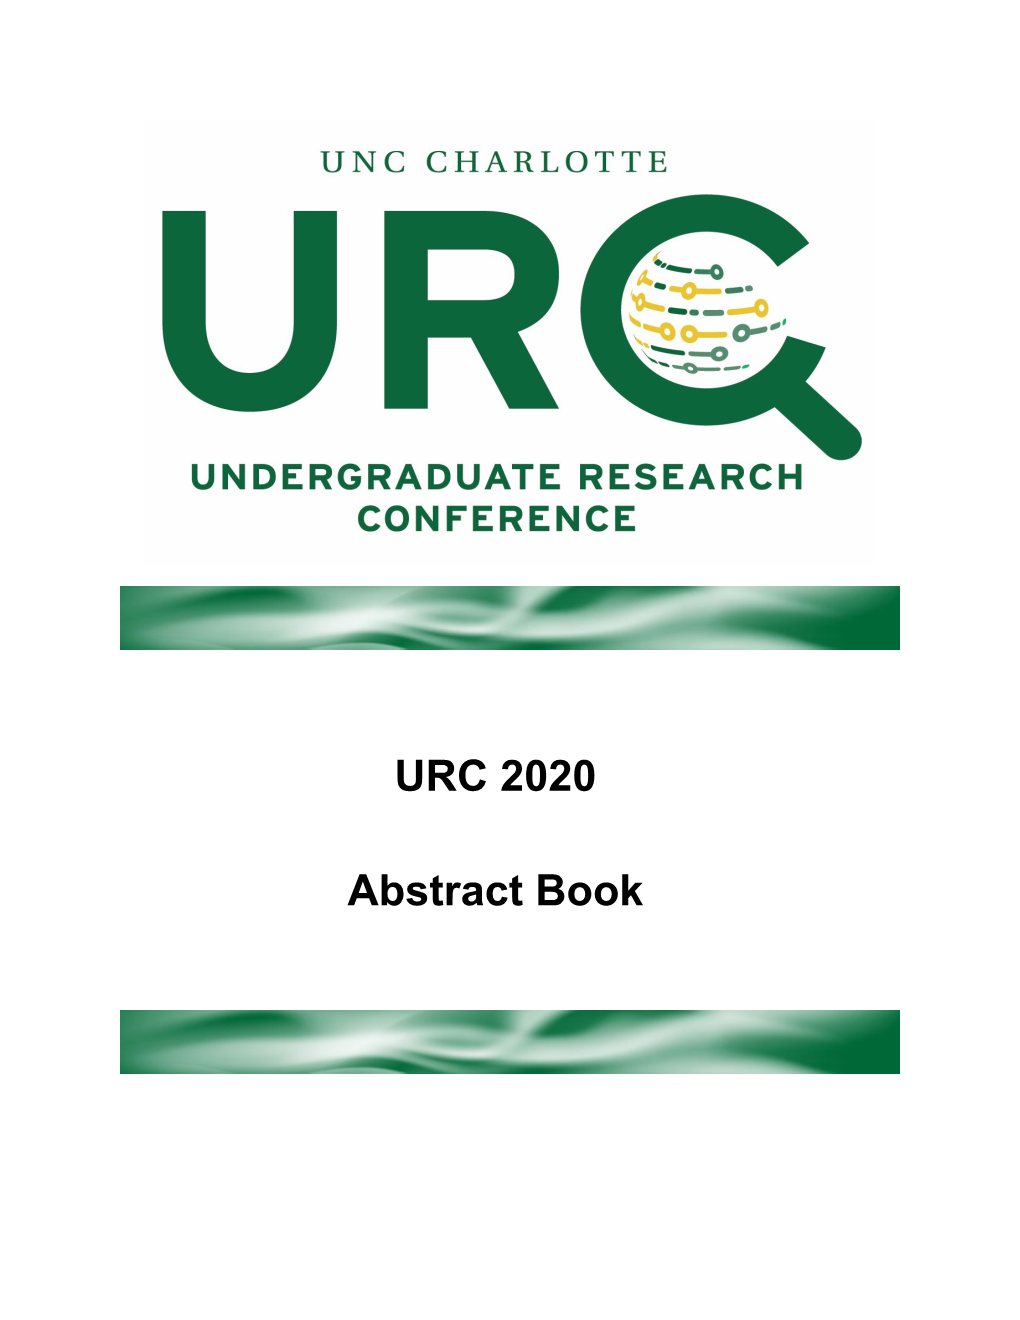 URC 2020 Abstract Book